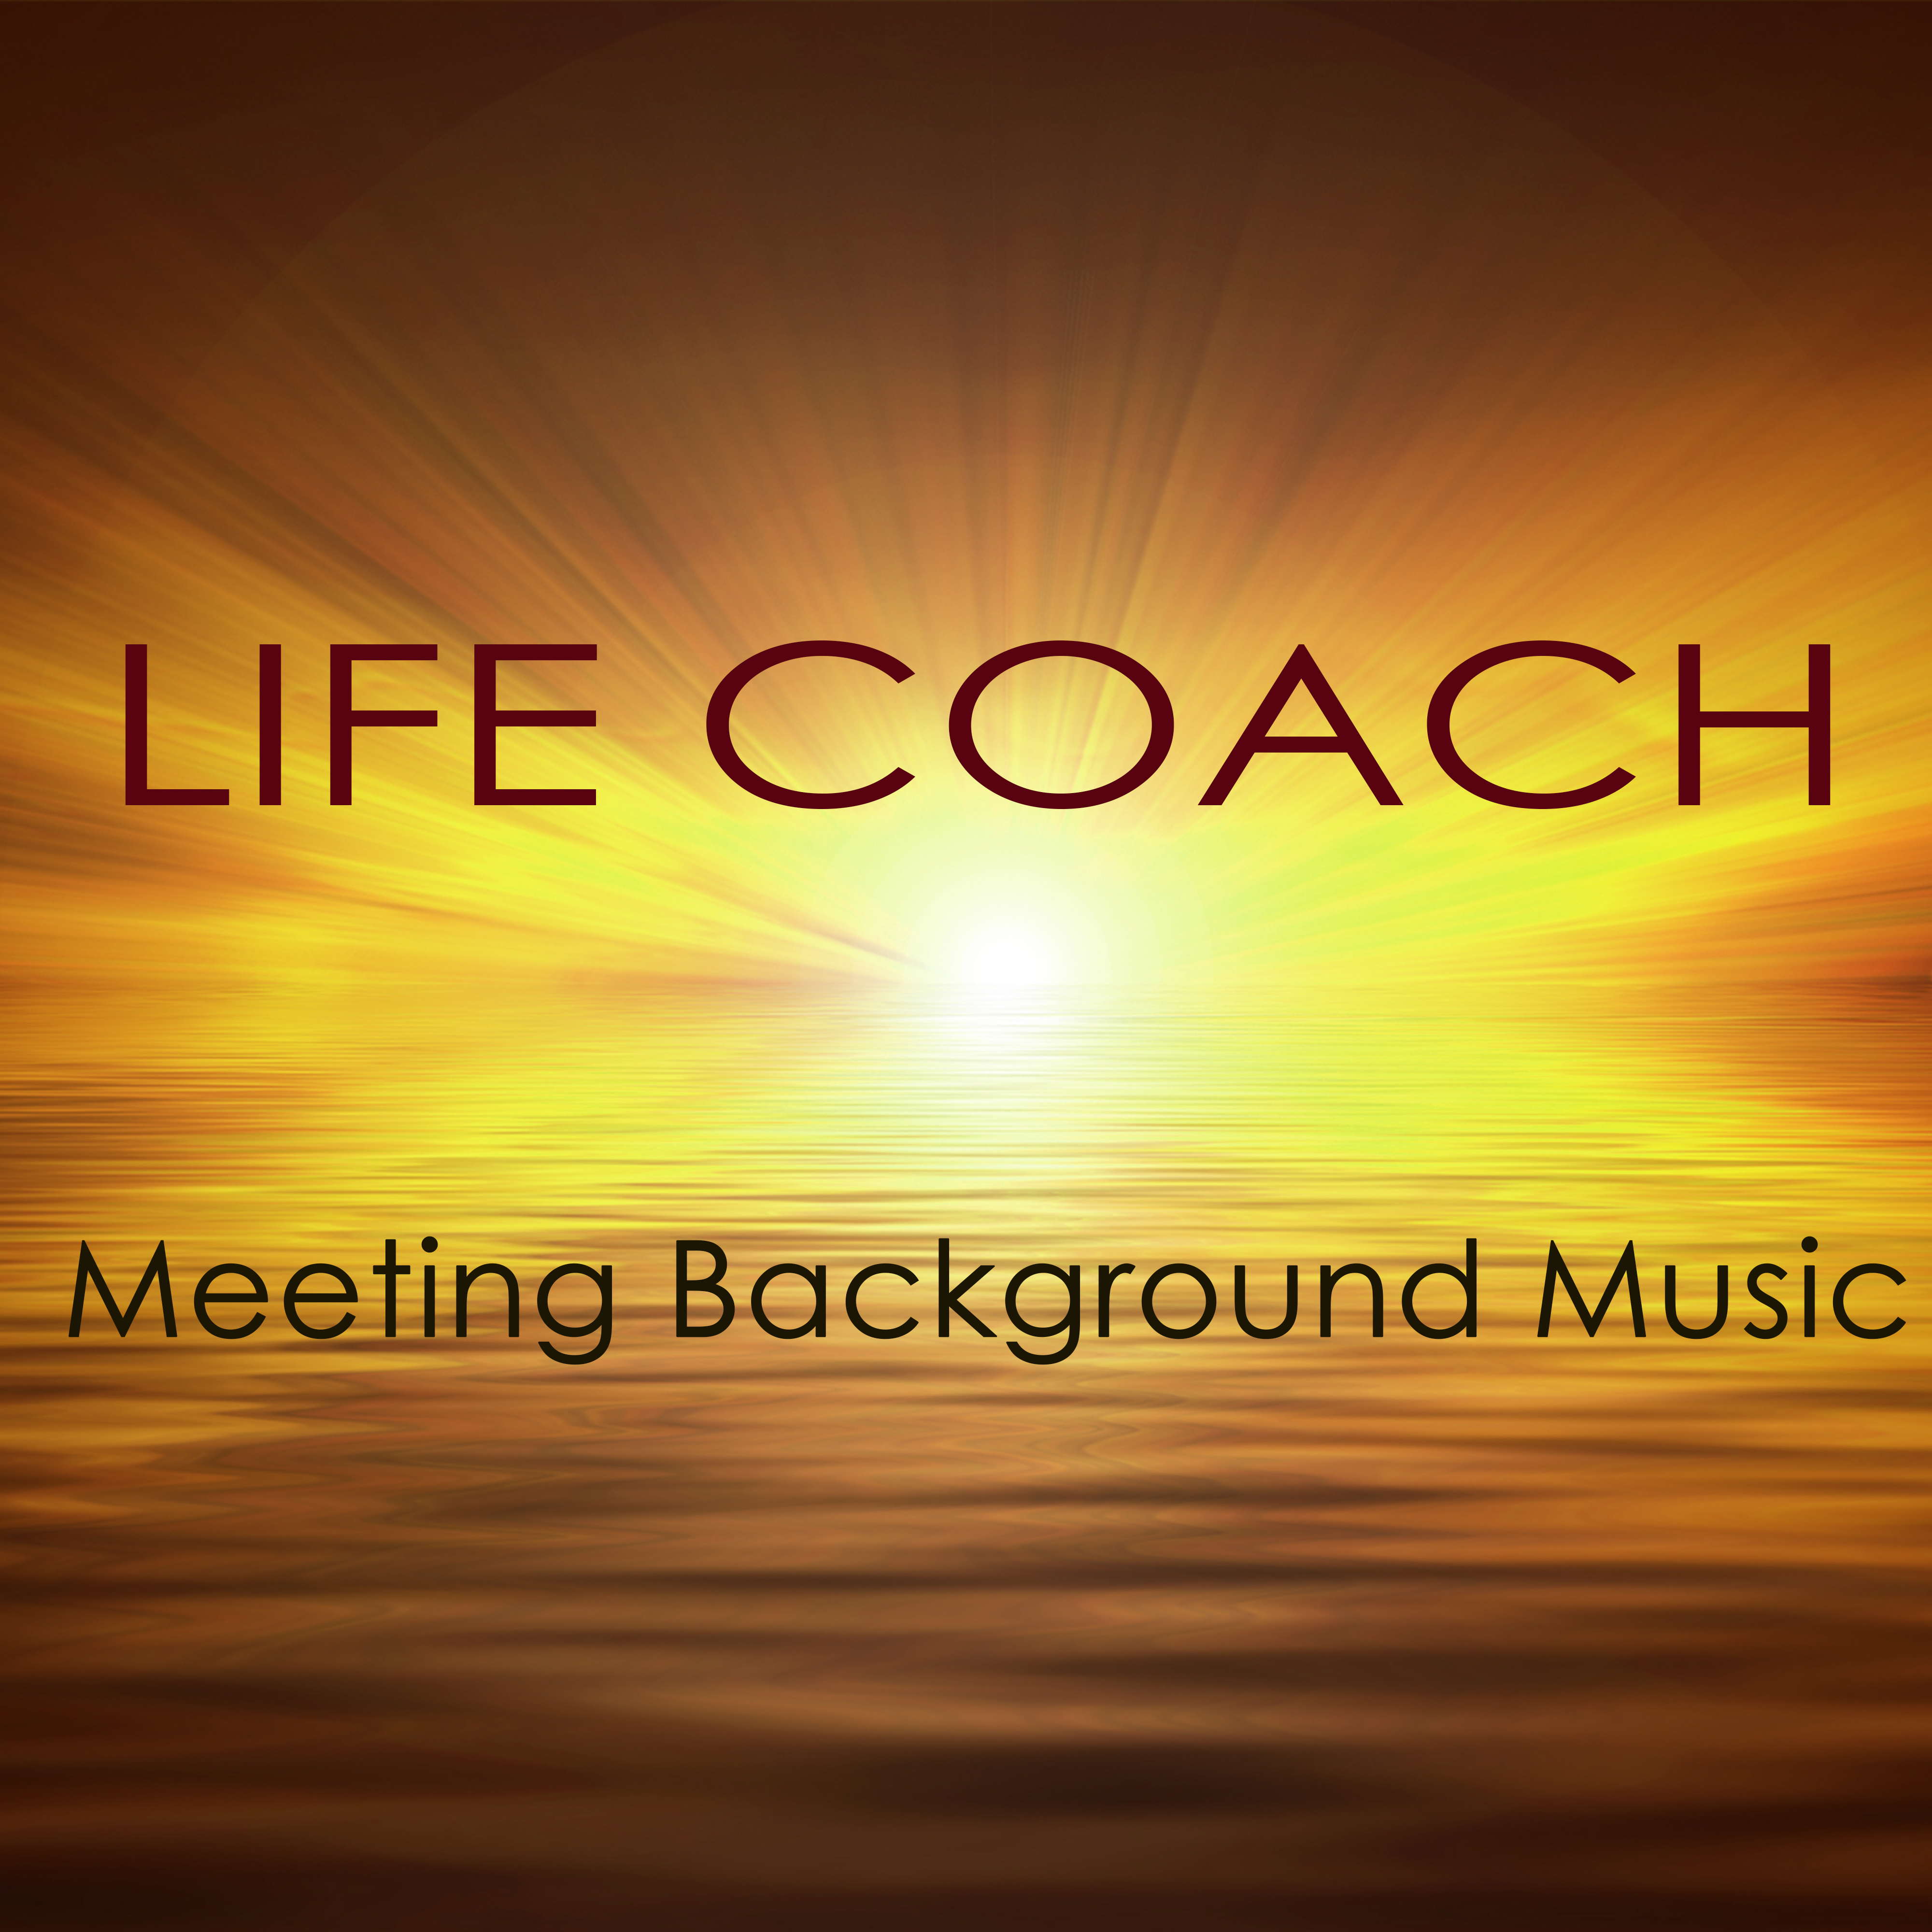 Life Coach Meeting Background Music  Instrumental Music for Conventions, Meetings, Autogenic Training, Life Coaching Positive Thinking  Meditation